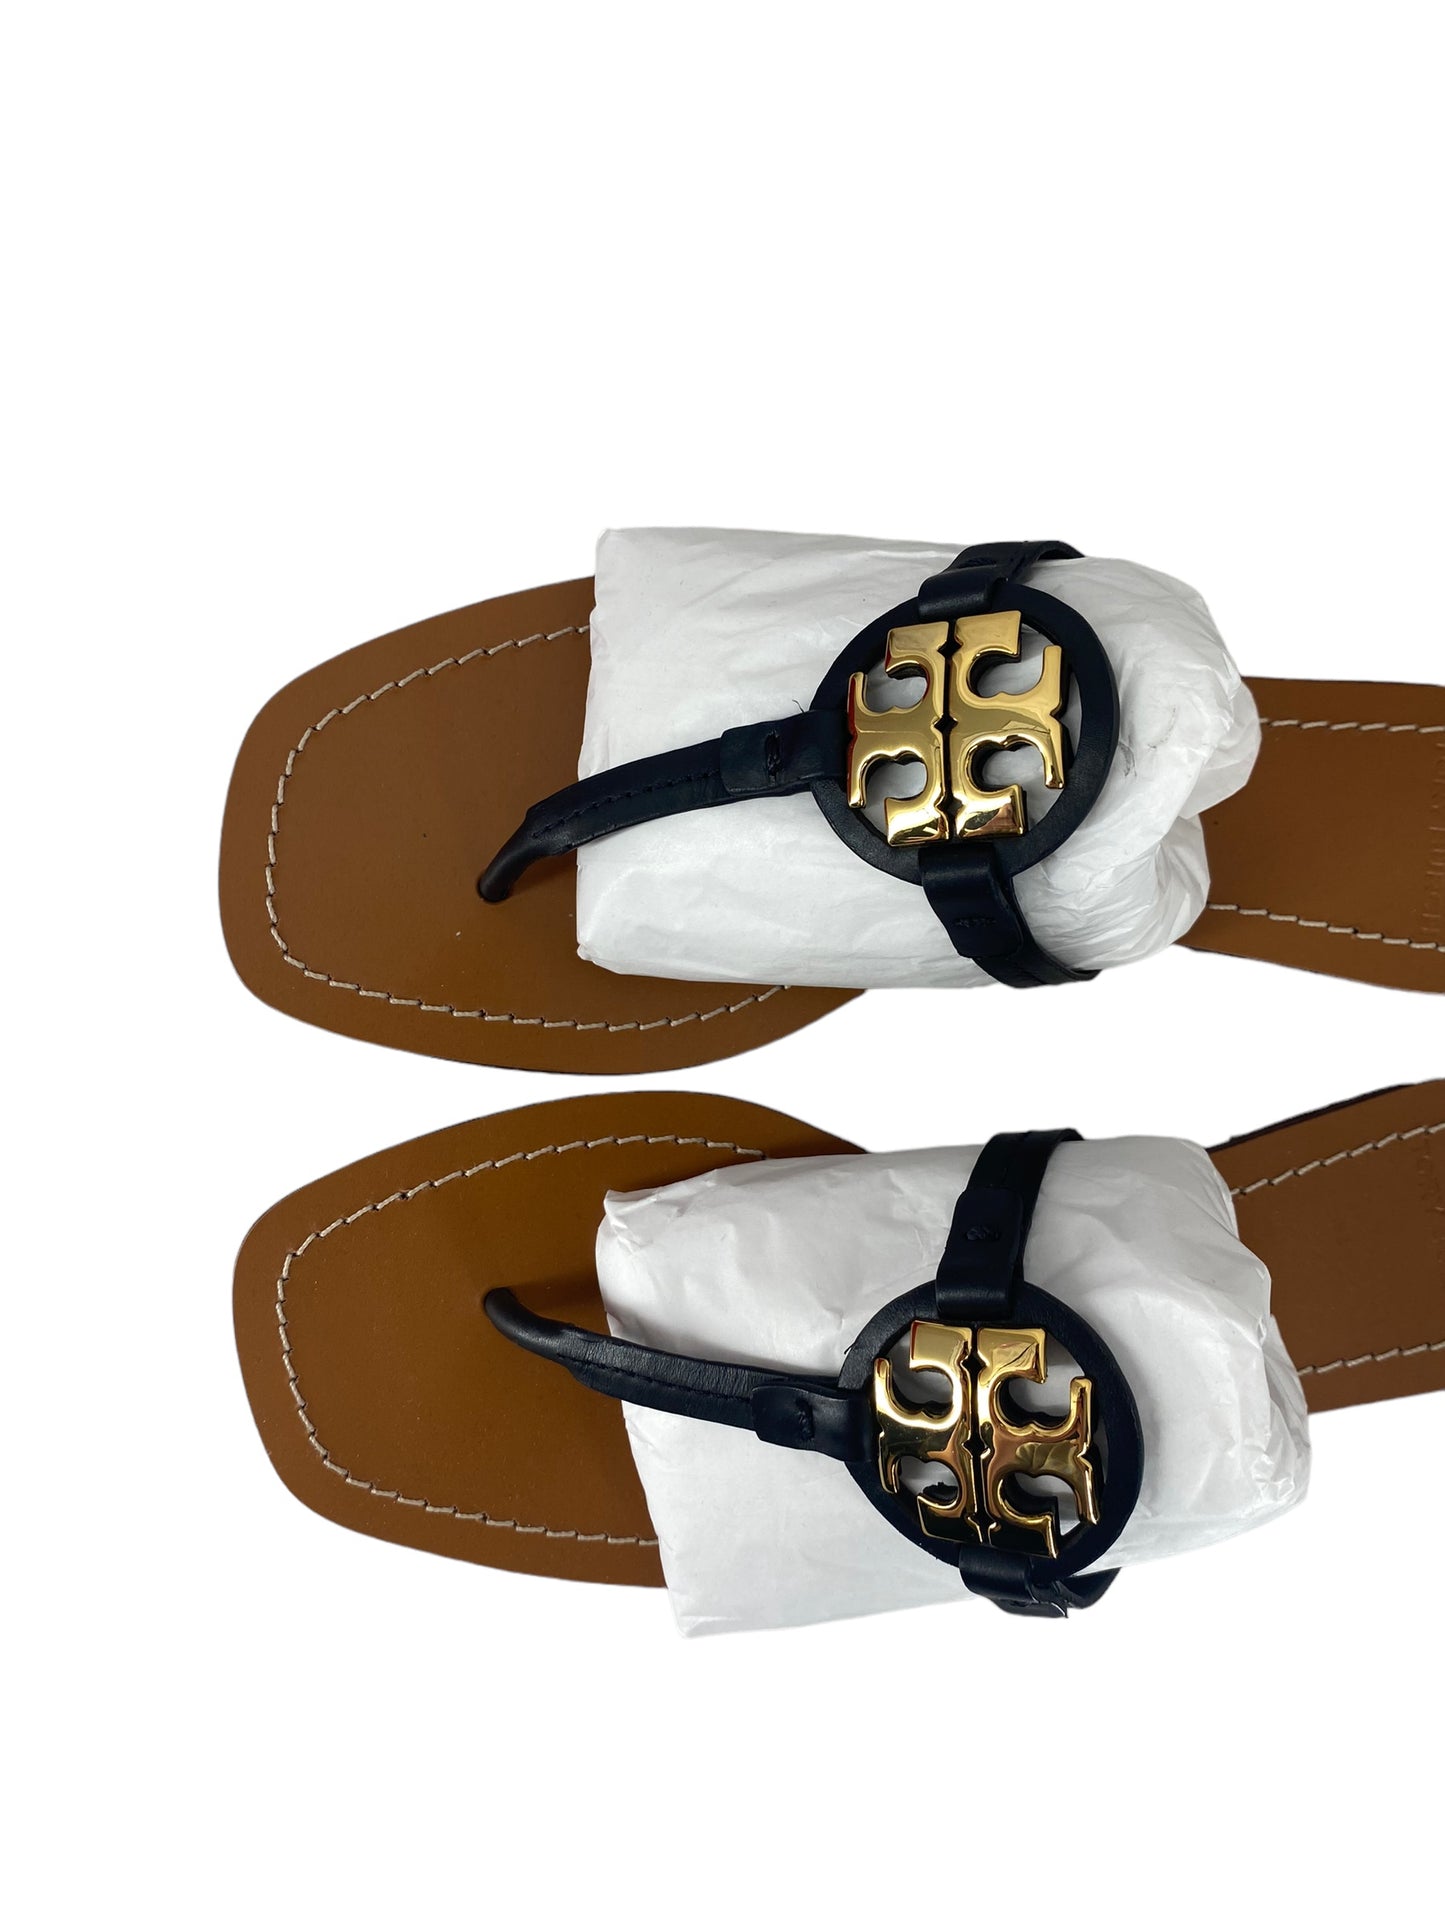 Sandals Designer By Tory Burch  Size: 7.5